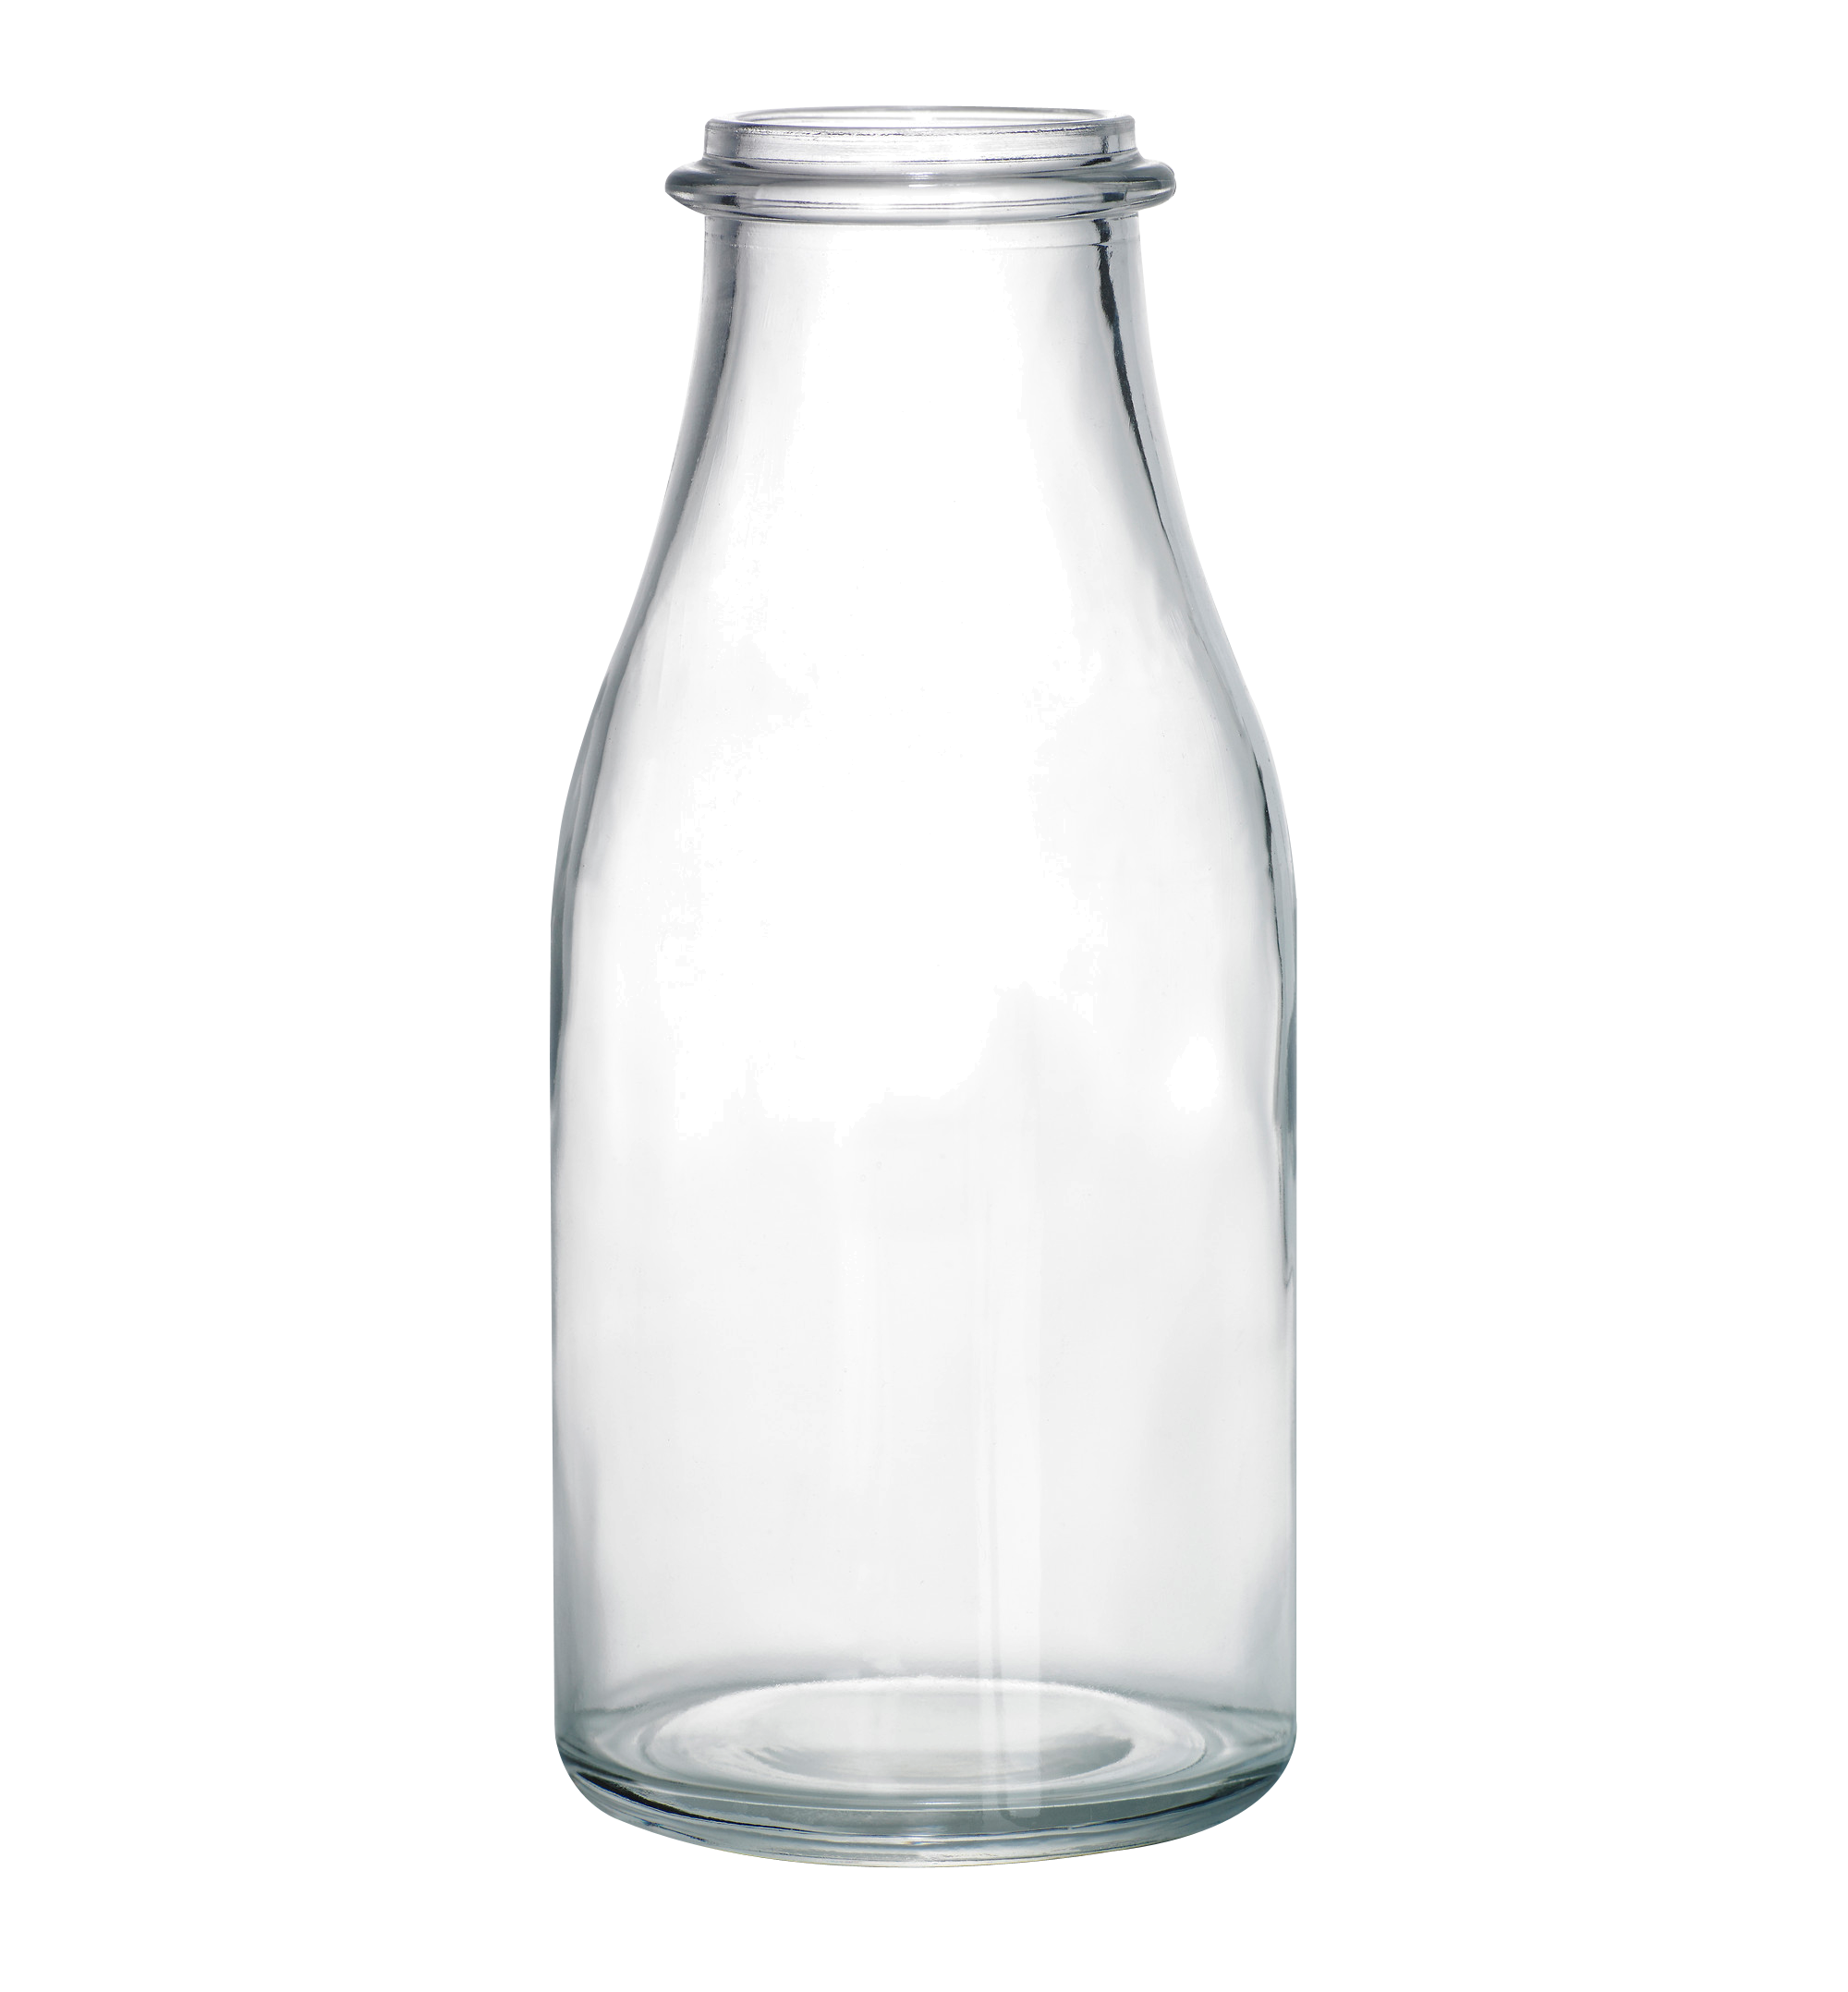 Glass Bottle PNG Image High Quality PNG Image